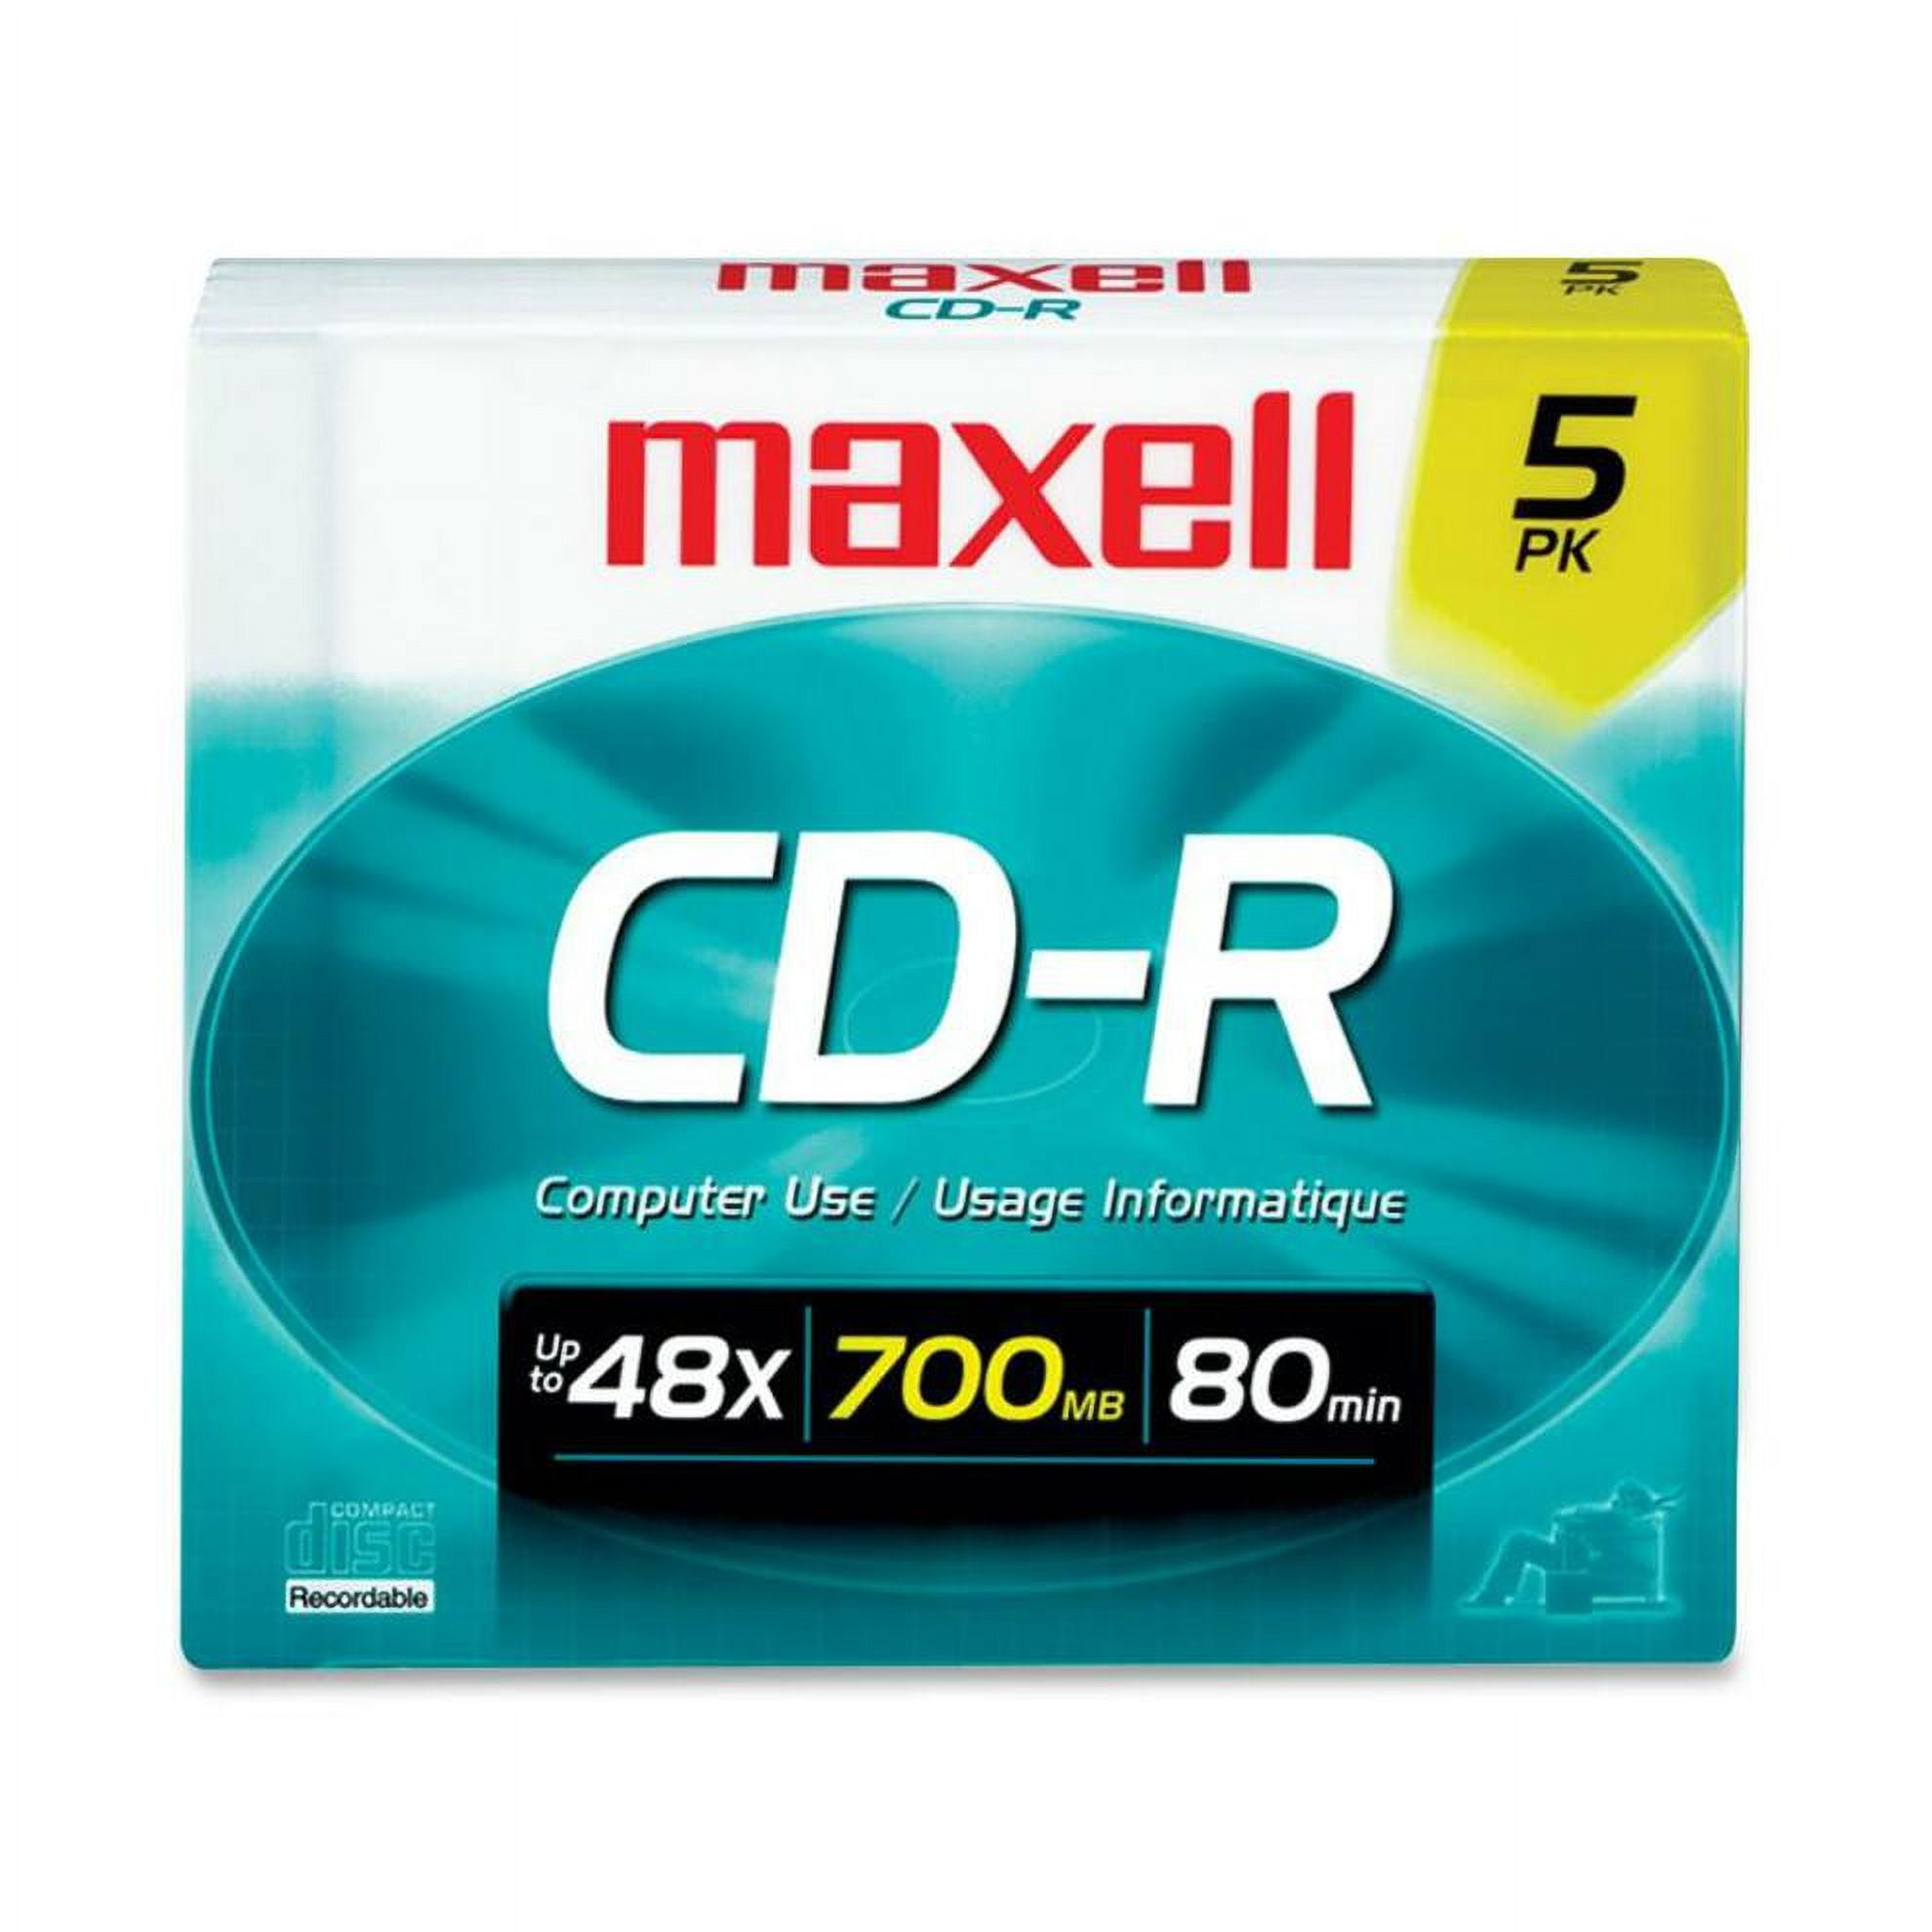 Maxell CD Recordable Media, CD-R, 48x, 700 MB, 5 Pack Slim Jewel Case